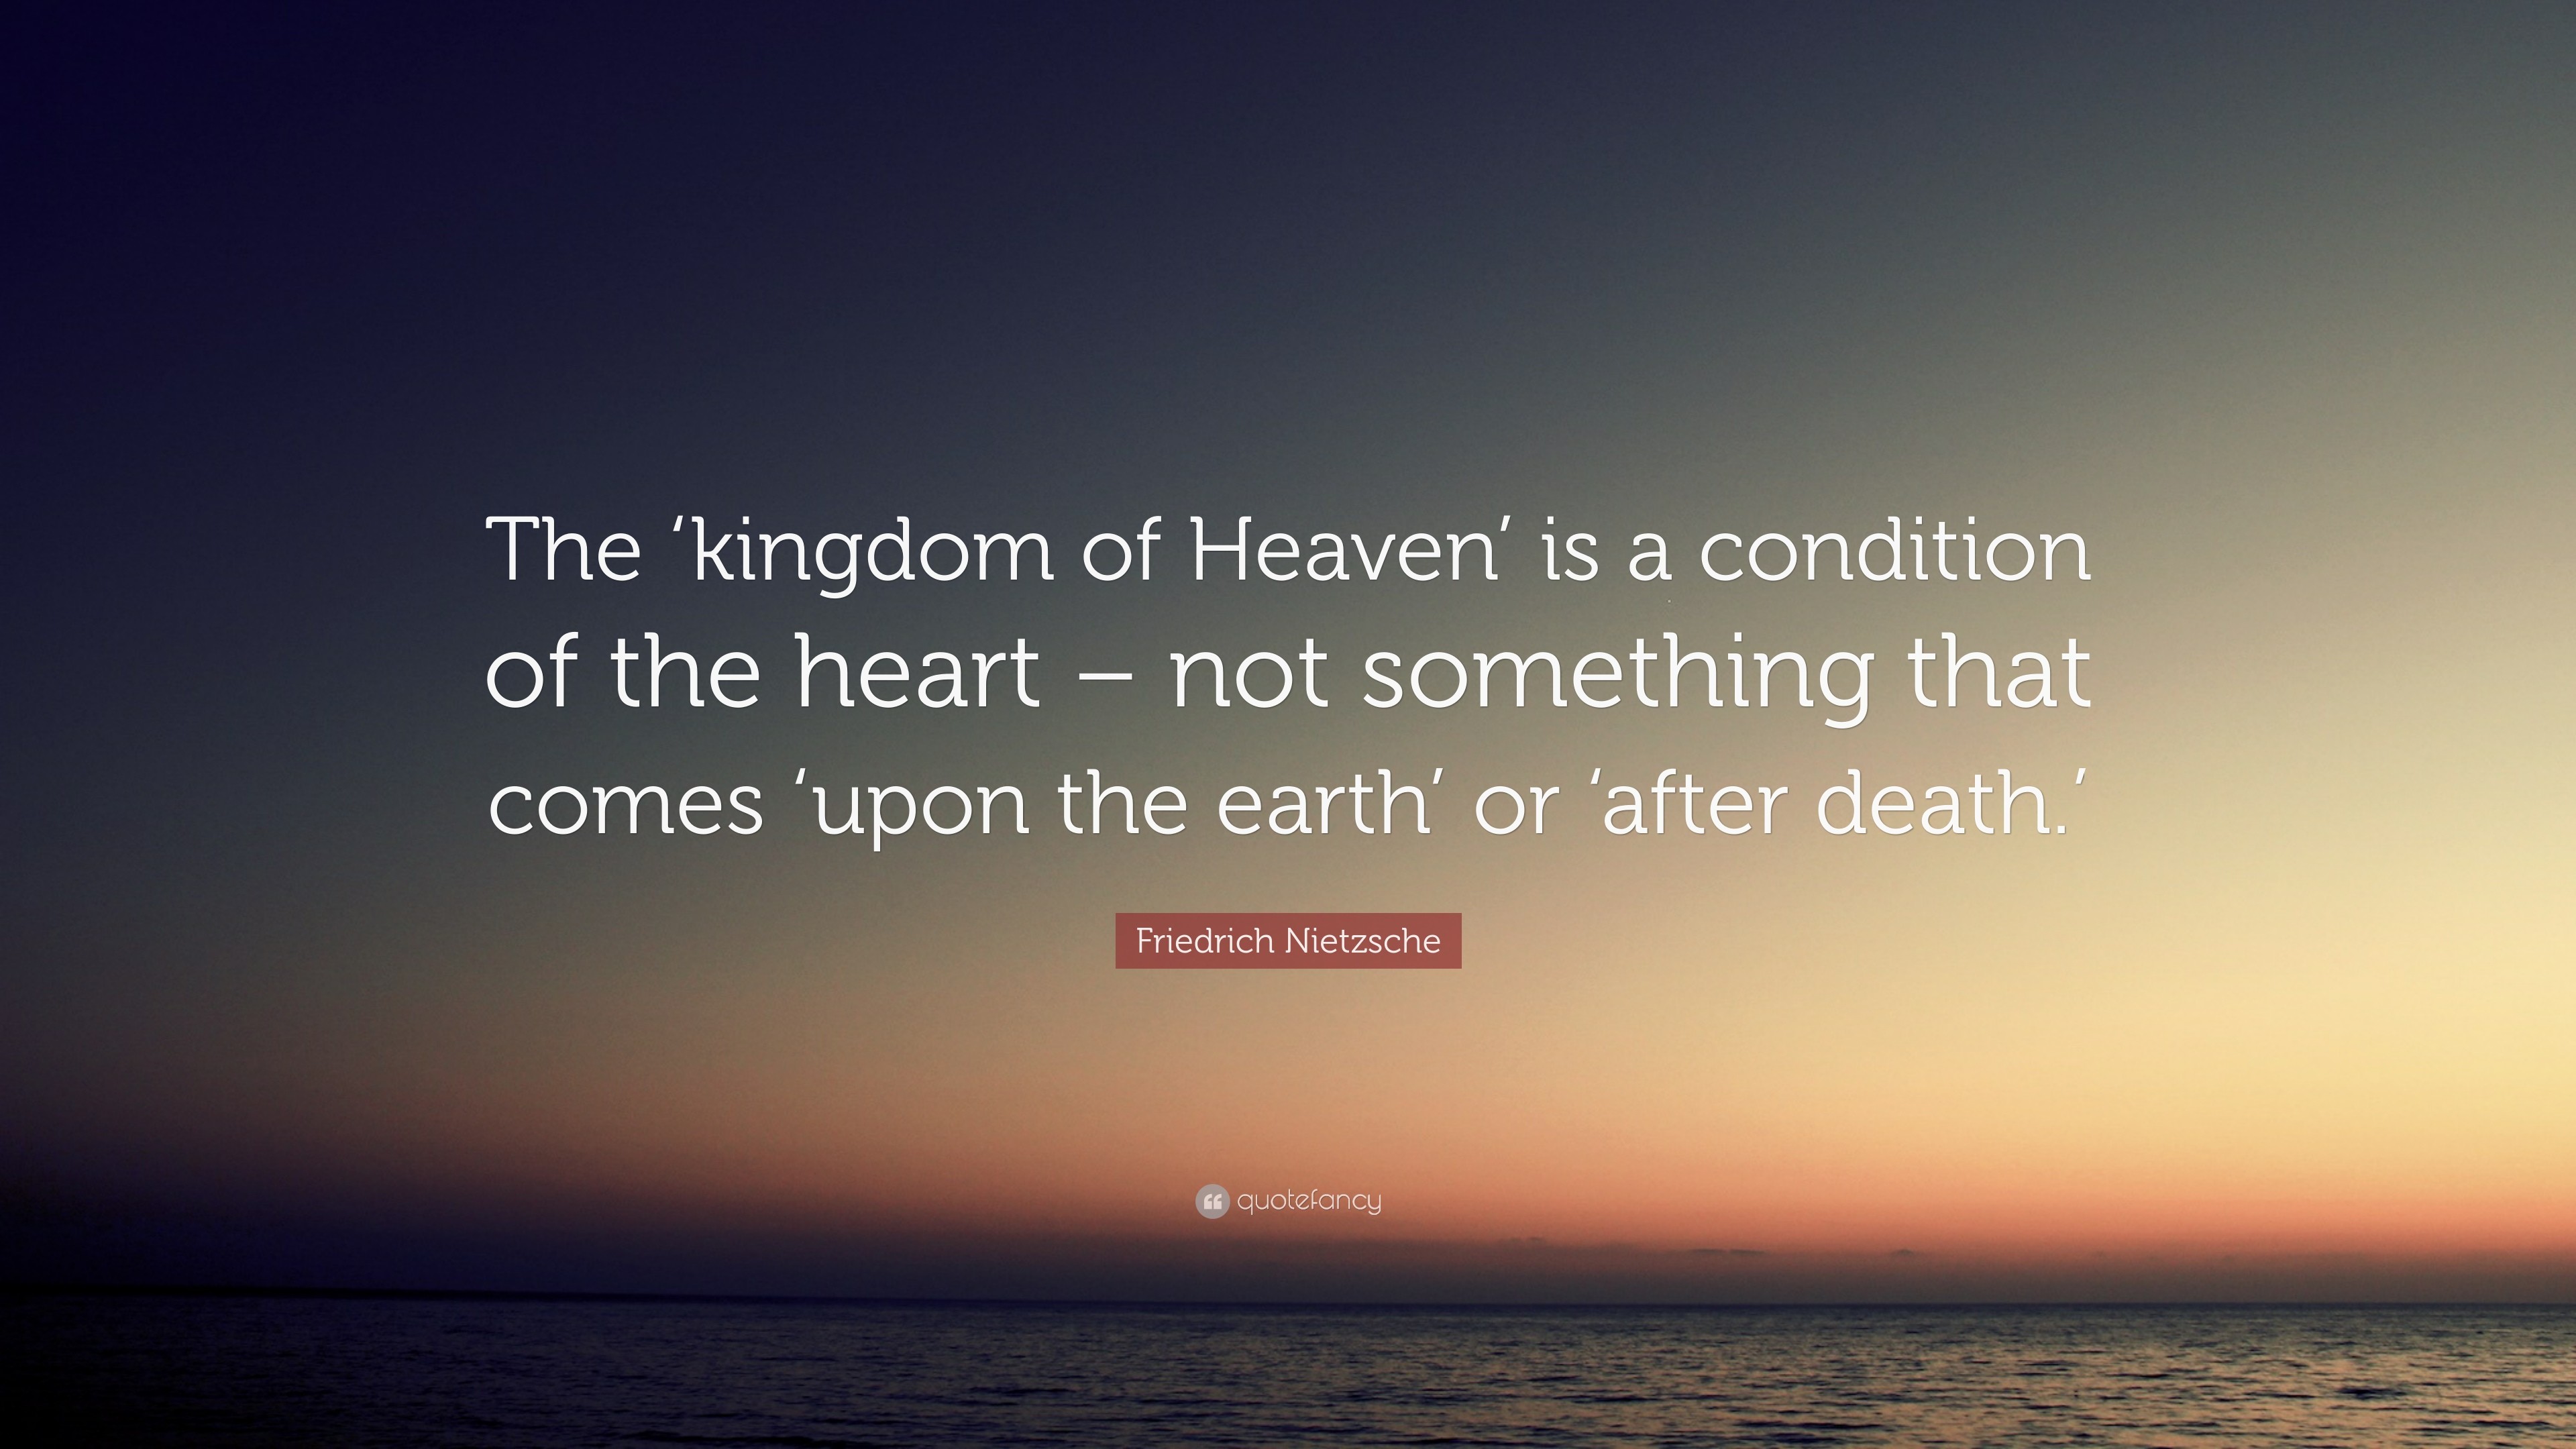 Friedrich Nietzsche Quote: “The 'kingdom of Heaven' is a condition of the